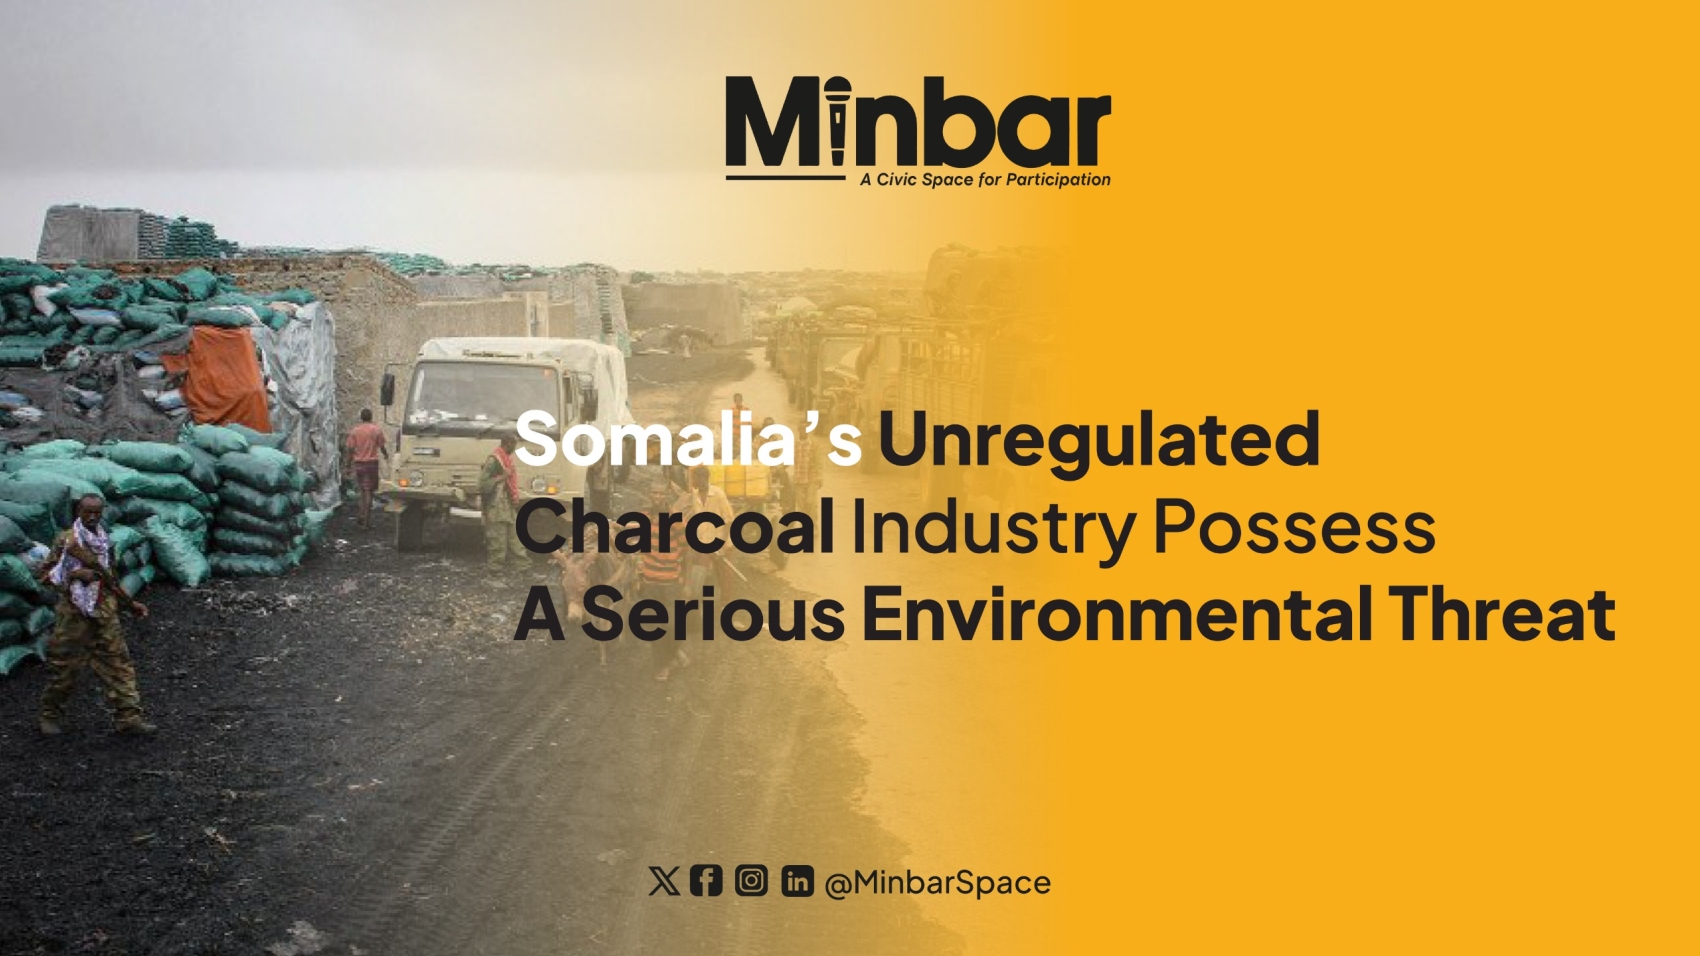 Somalia’s unregulated charcoal industry possess a serious environmental threat